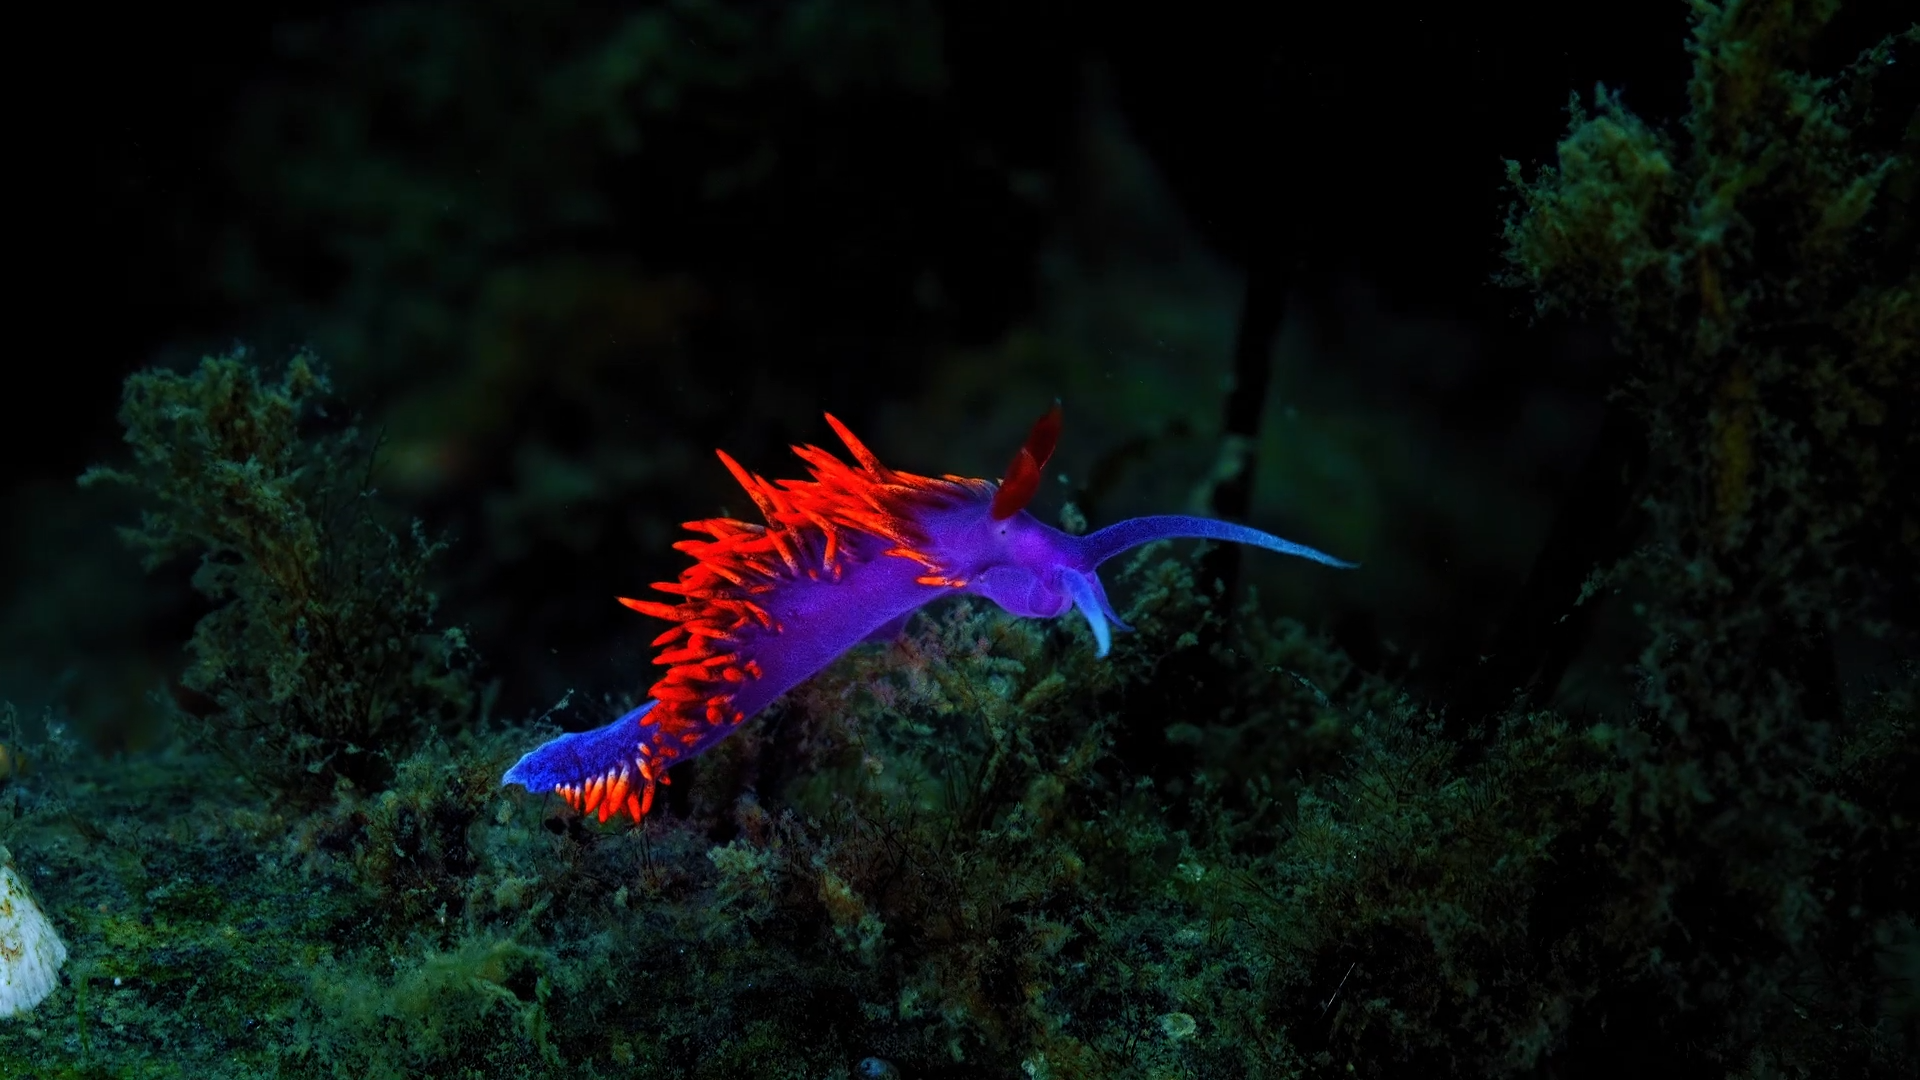 Blue and red nudibranch. Credit: BioQuest Studios/MBL